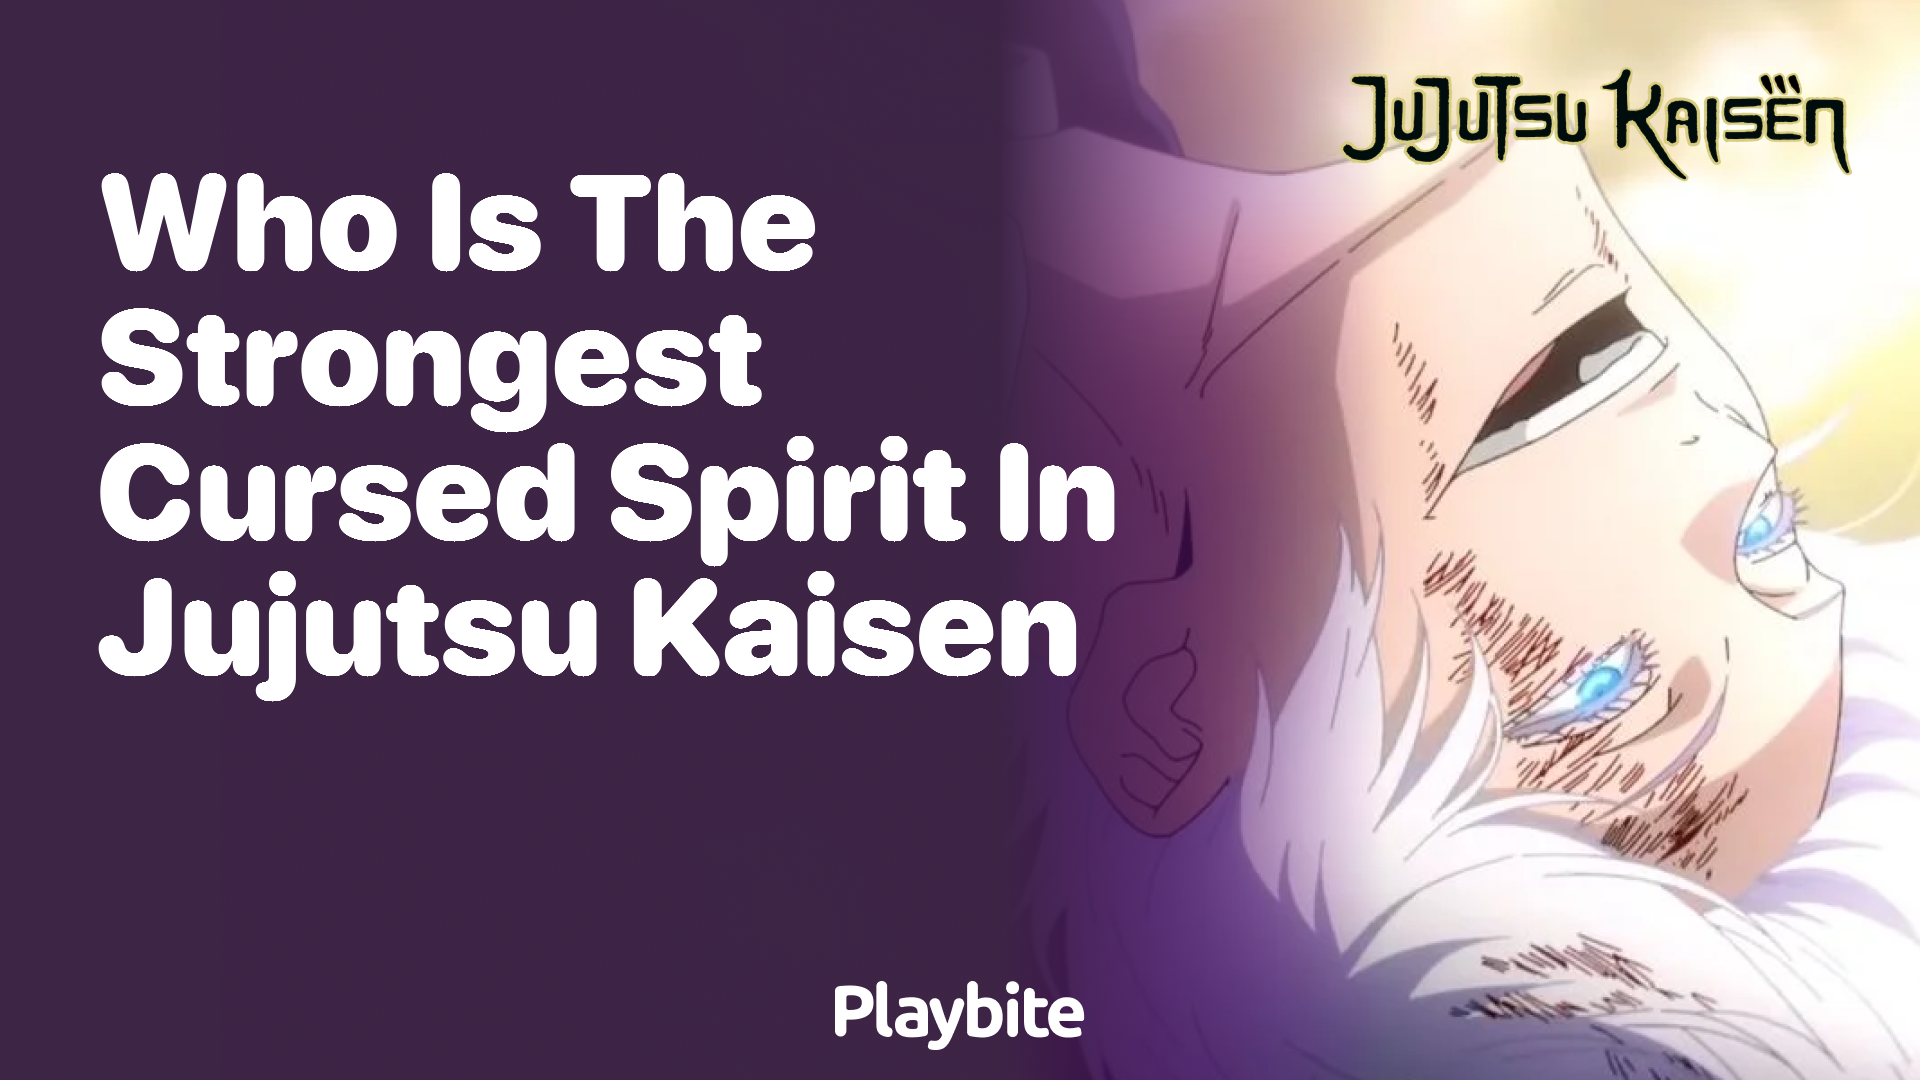 Who is the strongest cursed spirit in Jujutsu Kaisen?